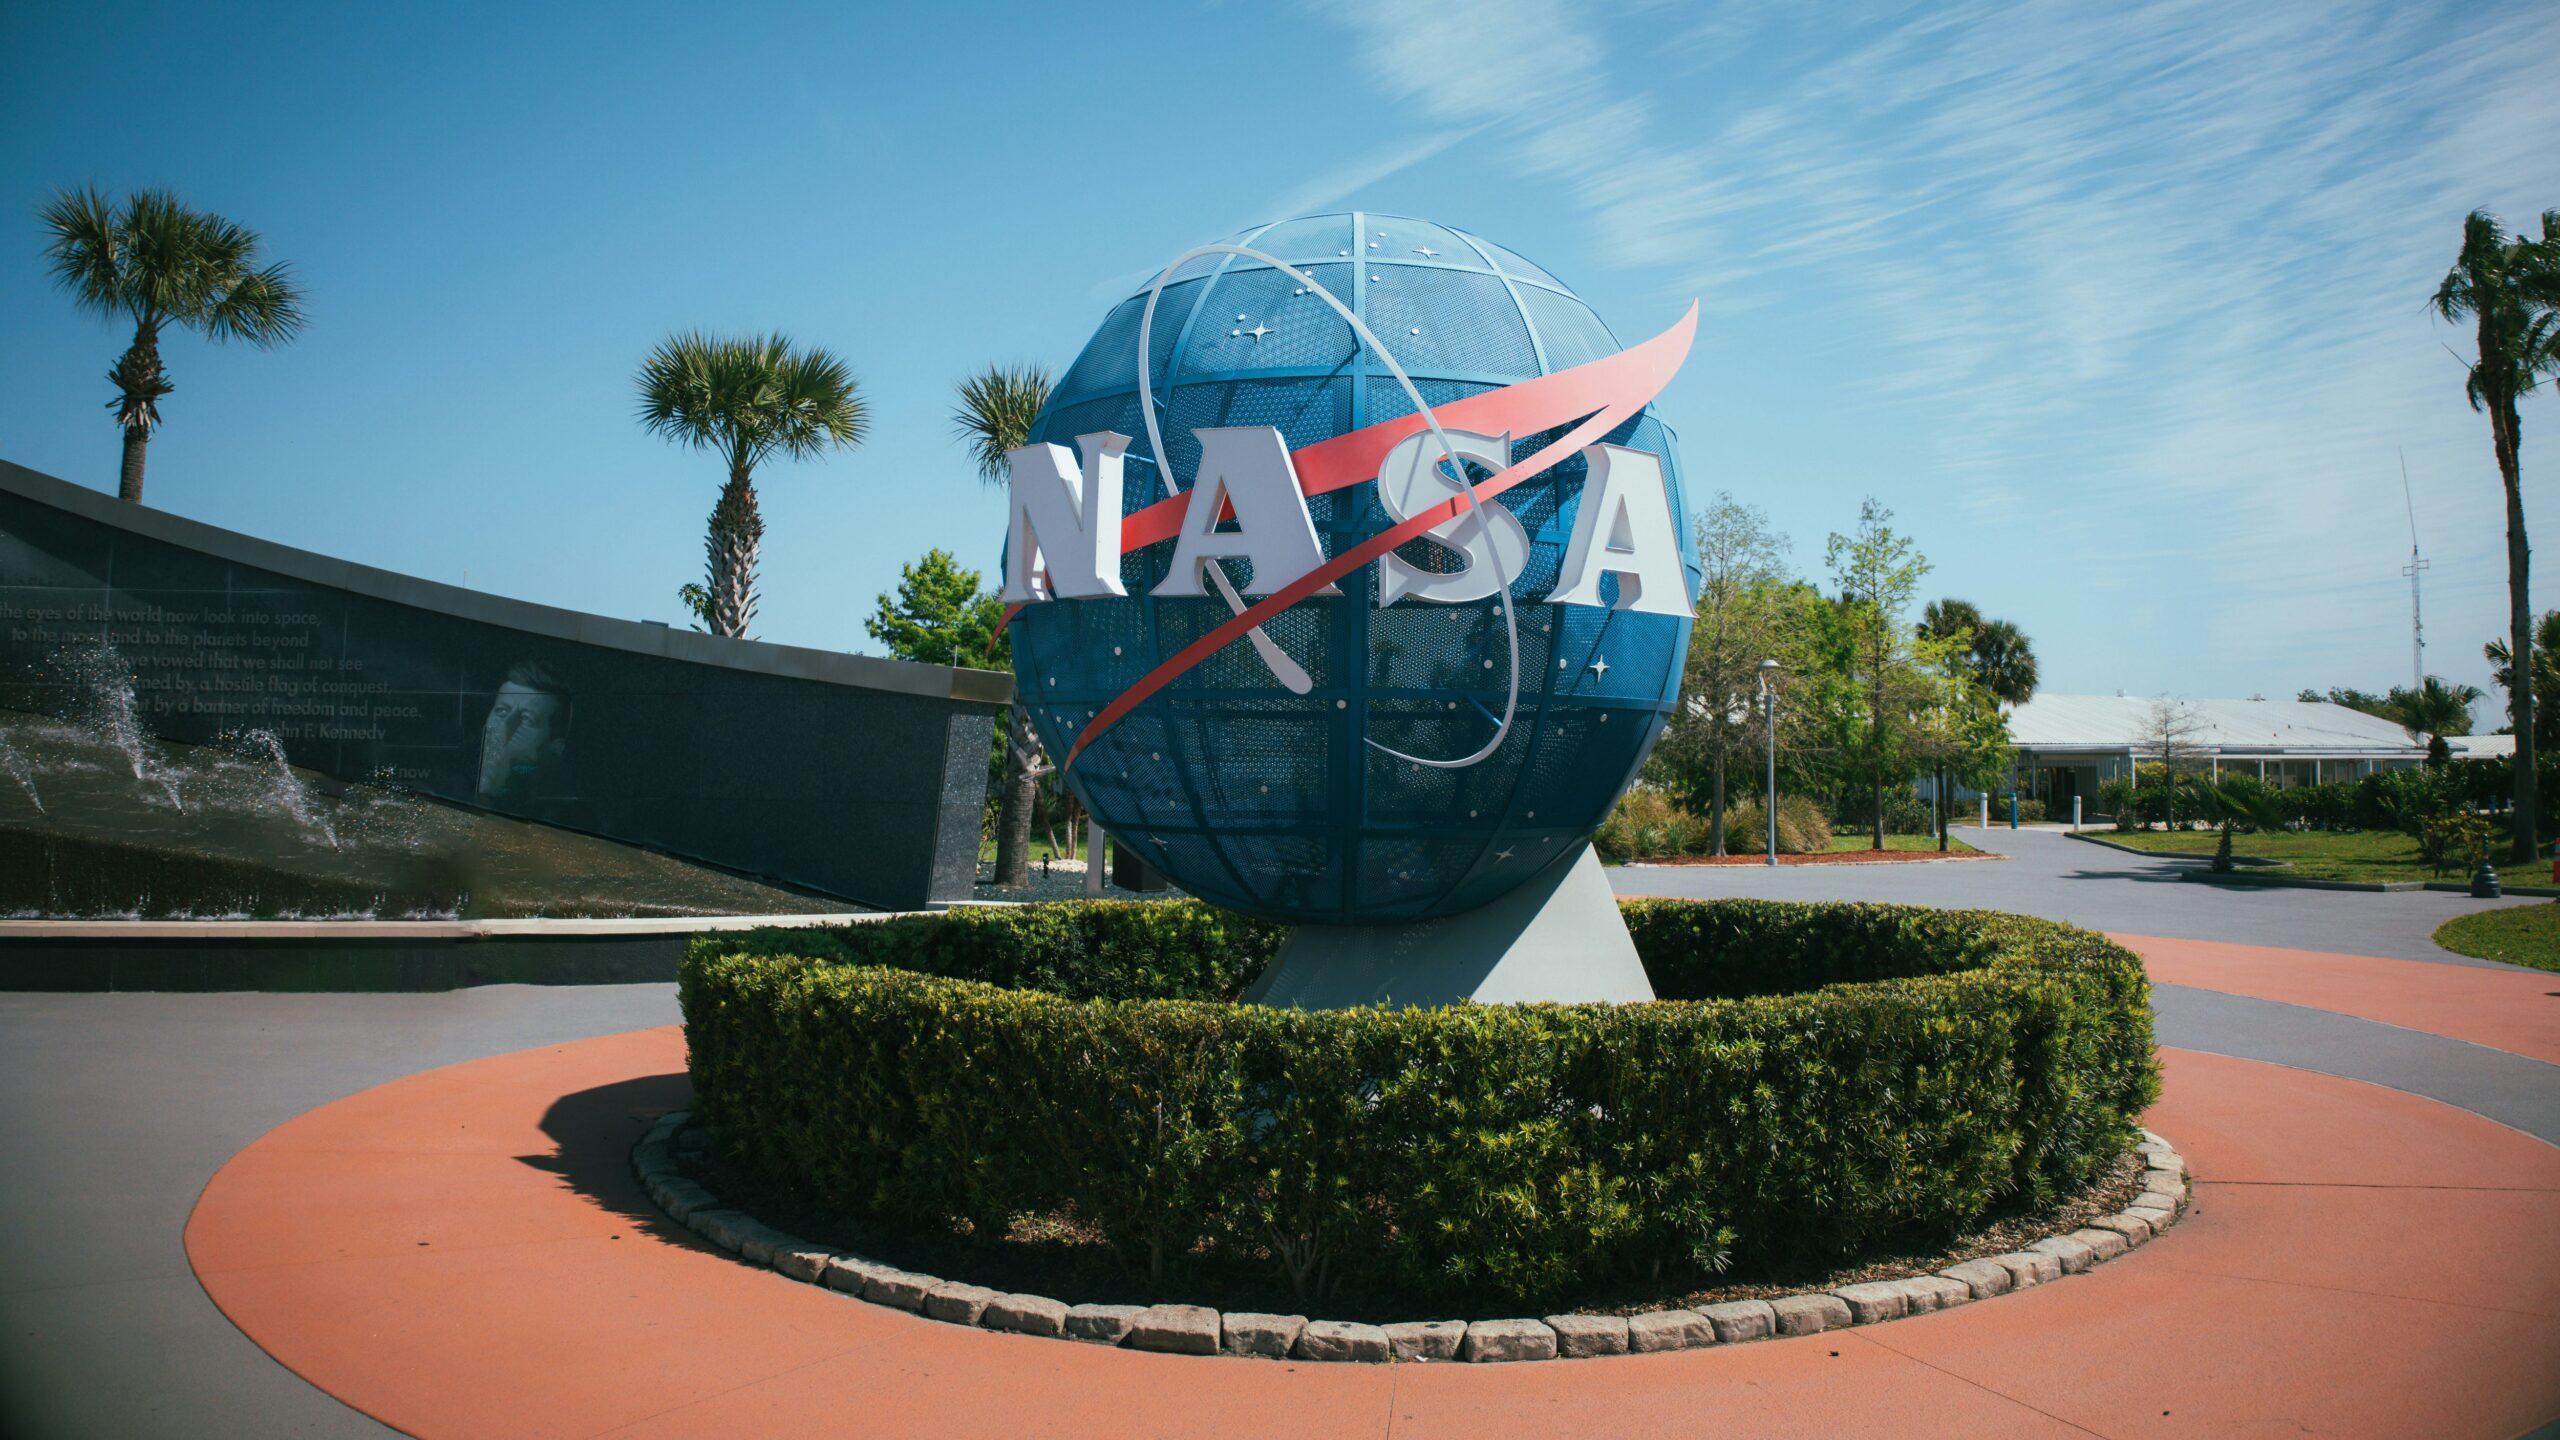 A globe object featuring the NASA logo at the Kennedy Space Center Visitor Complex in Florida, USA.